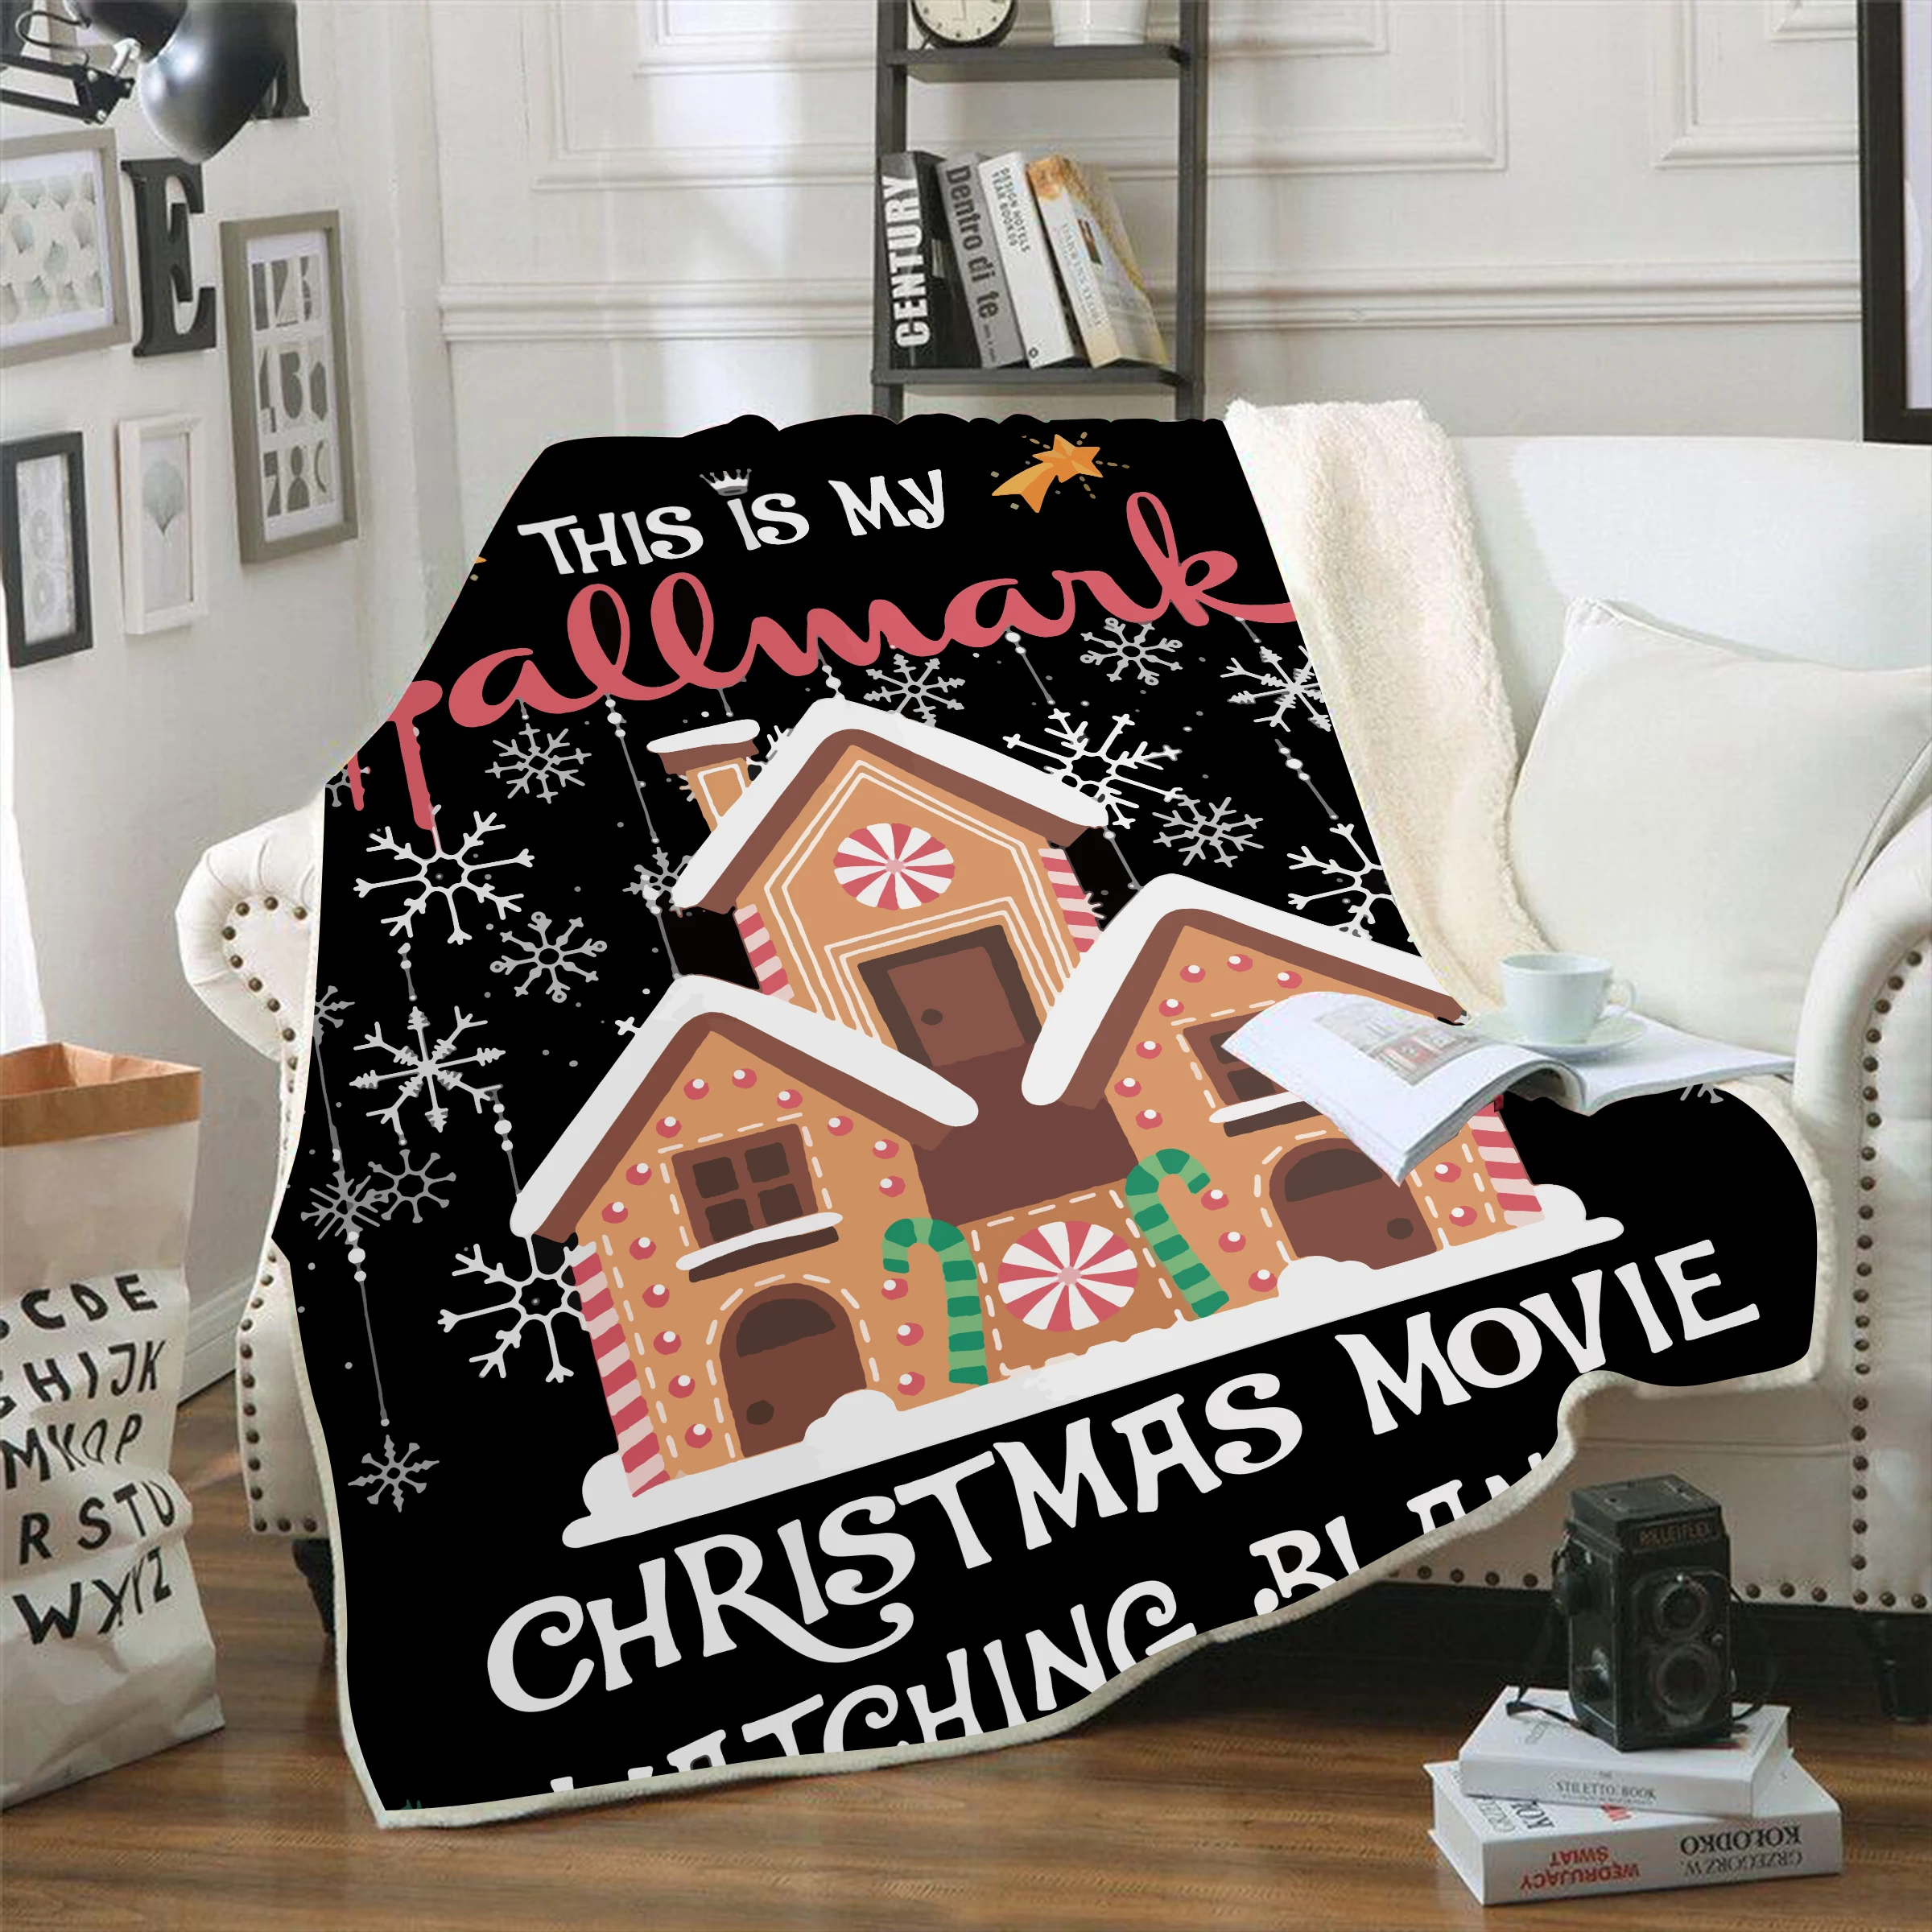 This is My Christmas Movie Watching Blanket Plush Couch Throw Blankets,Warm Cozy Fluffy Fuzzy Blankets Decorative Blankets Sherpa Blanket Super Soft Fleece Throw Blanket for Bed Sofa Purple 39x49